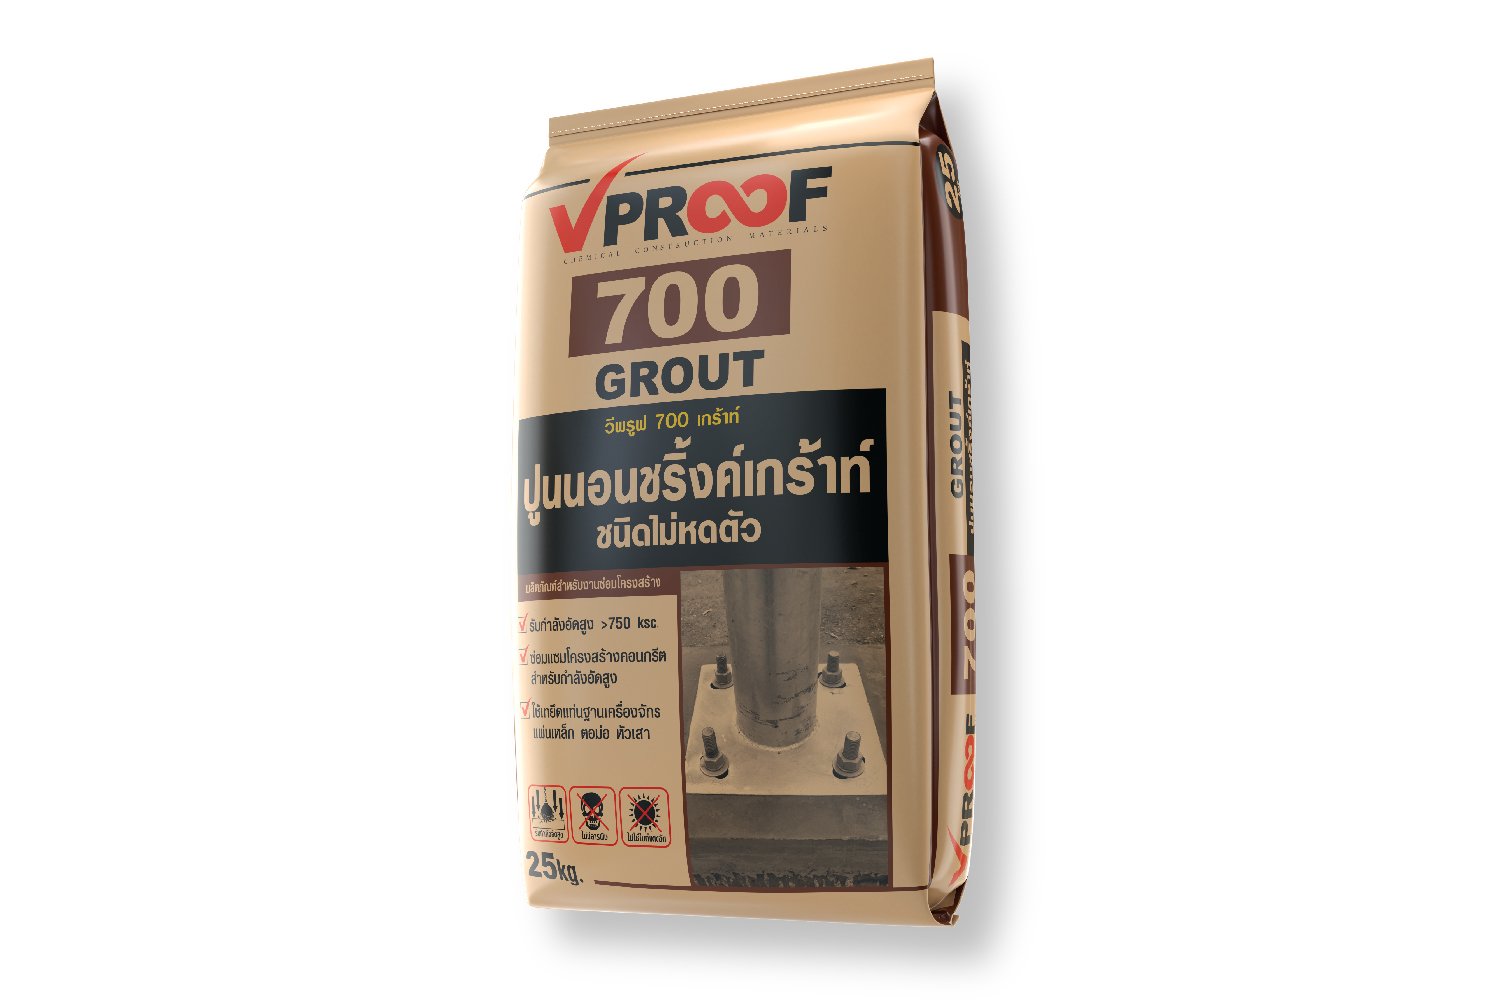 VPROOF 700 GROUT